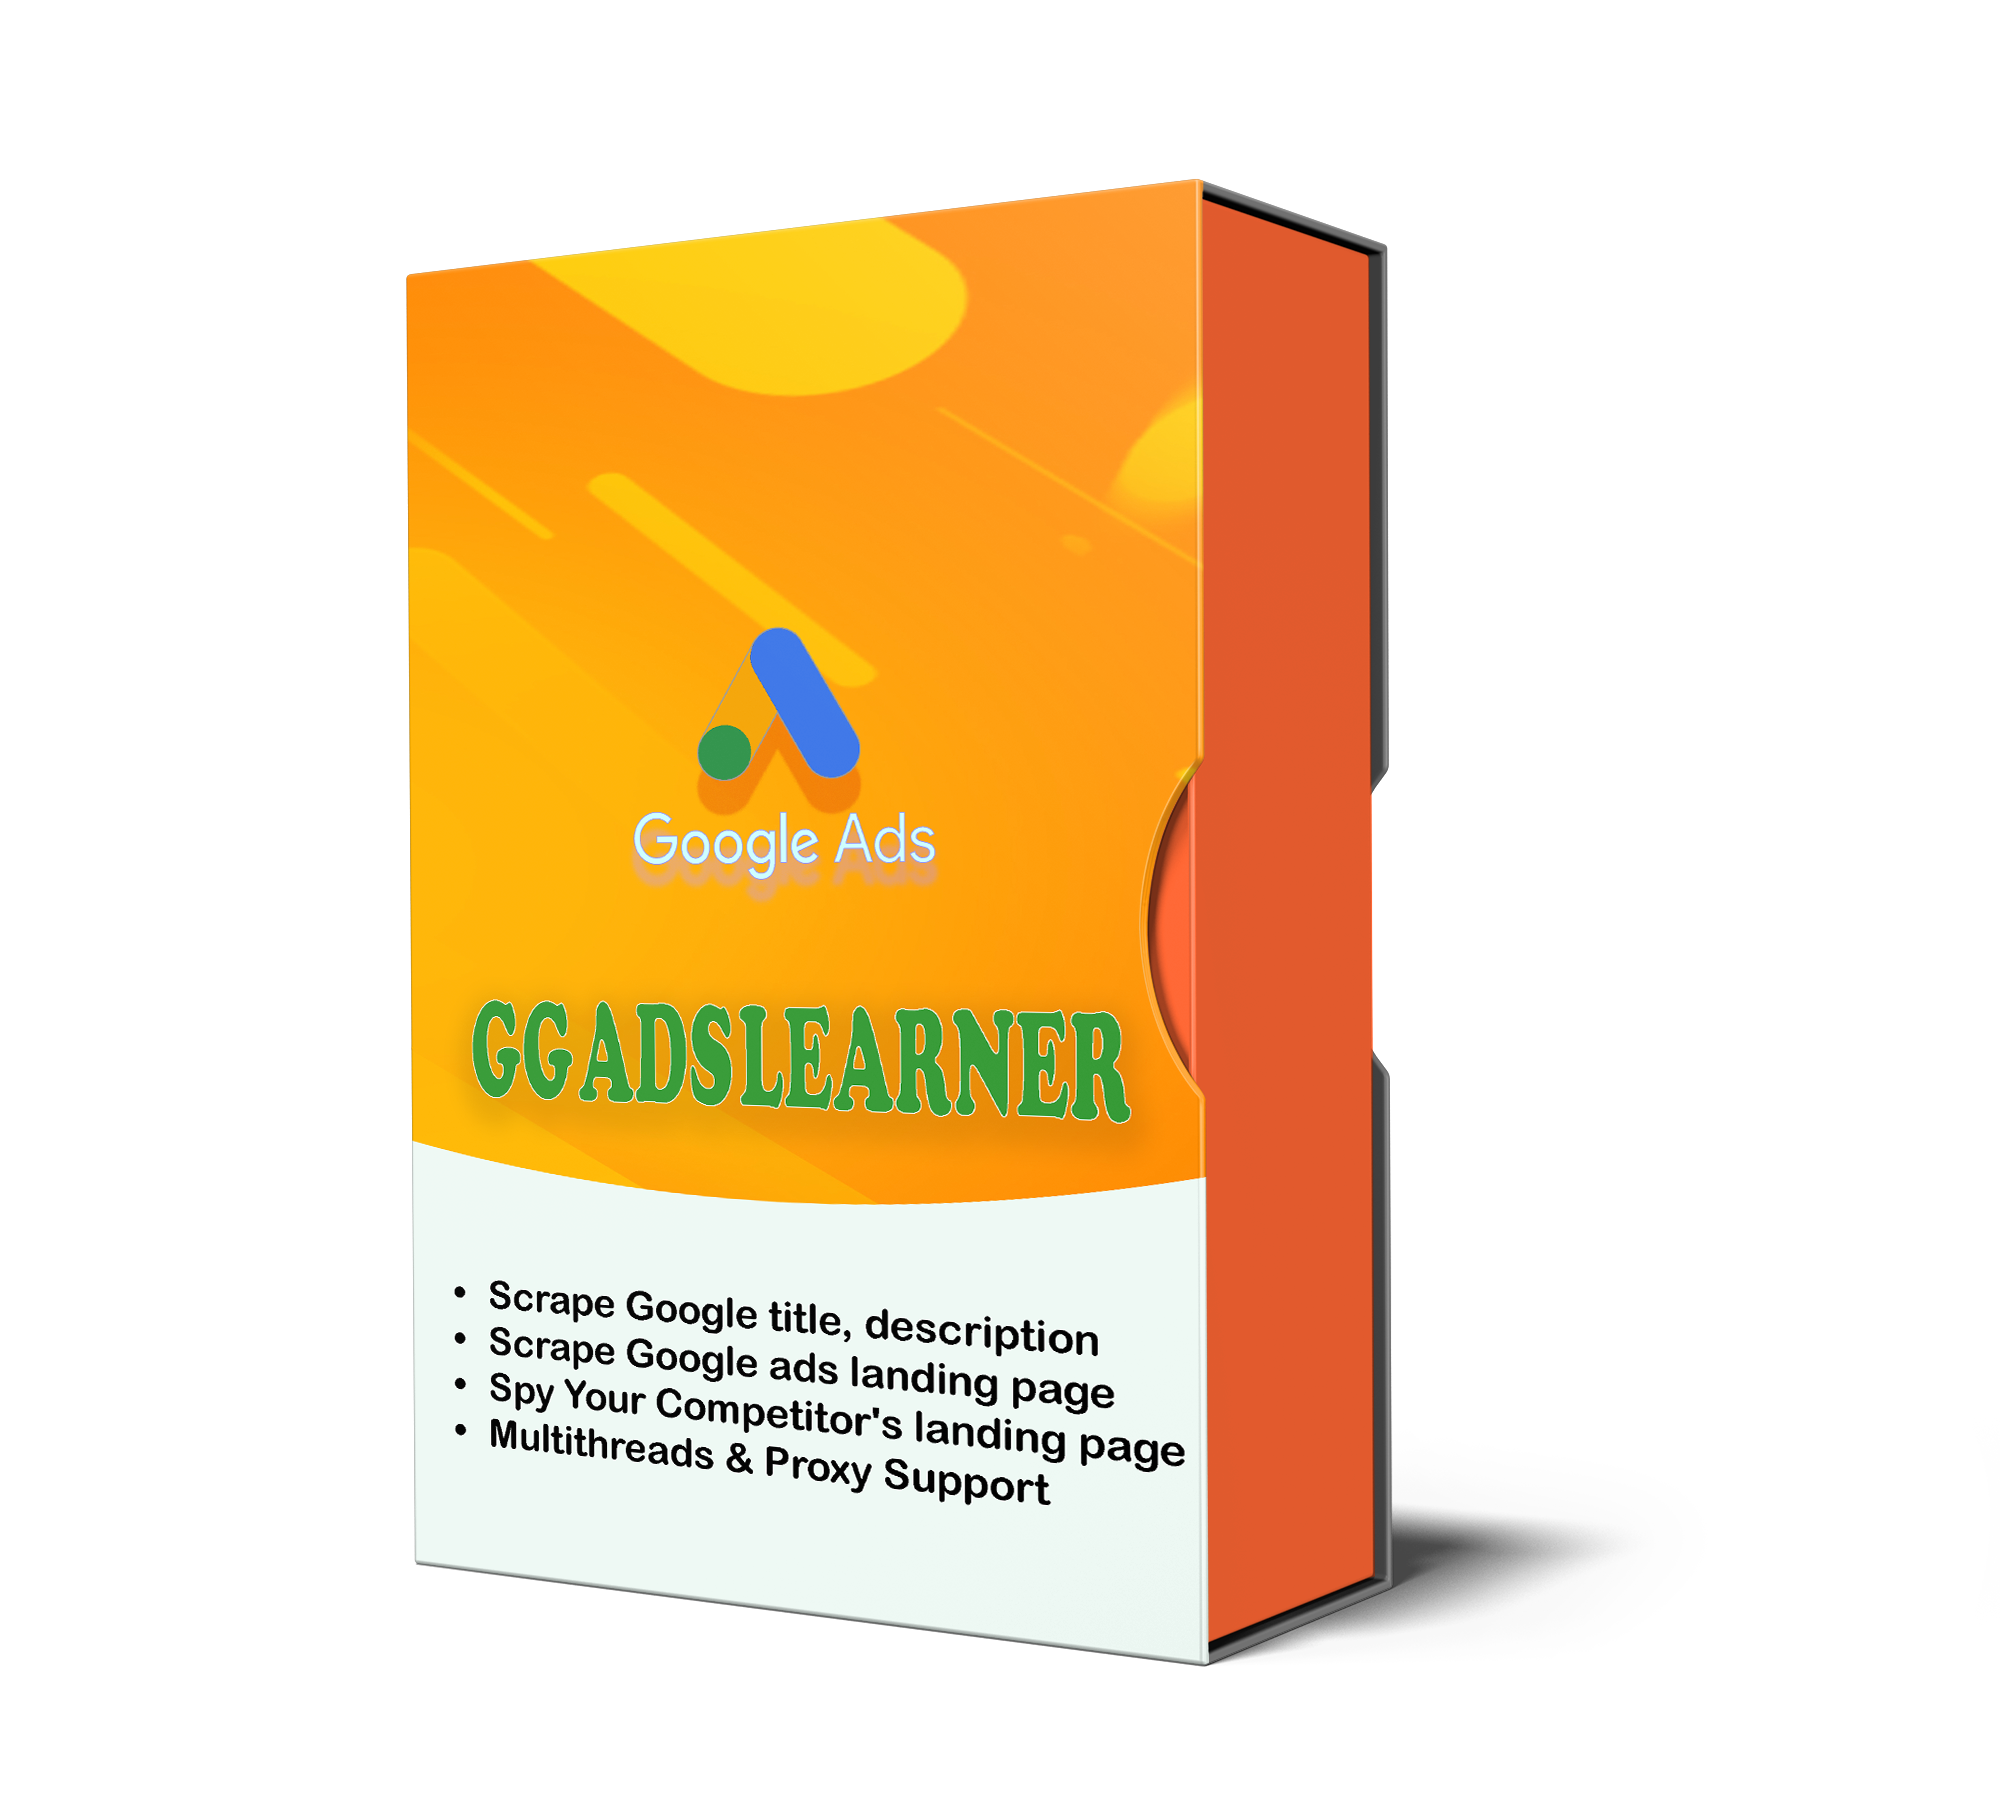 GGAdsLearner Tool – How To Spy your Challenger’s ads on Google – Scrape ads titles, description, landing page